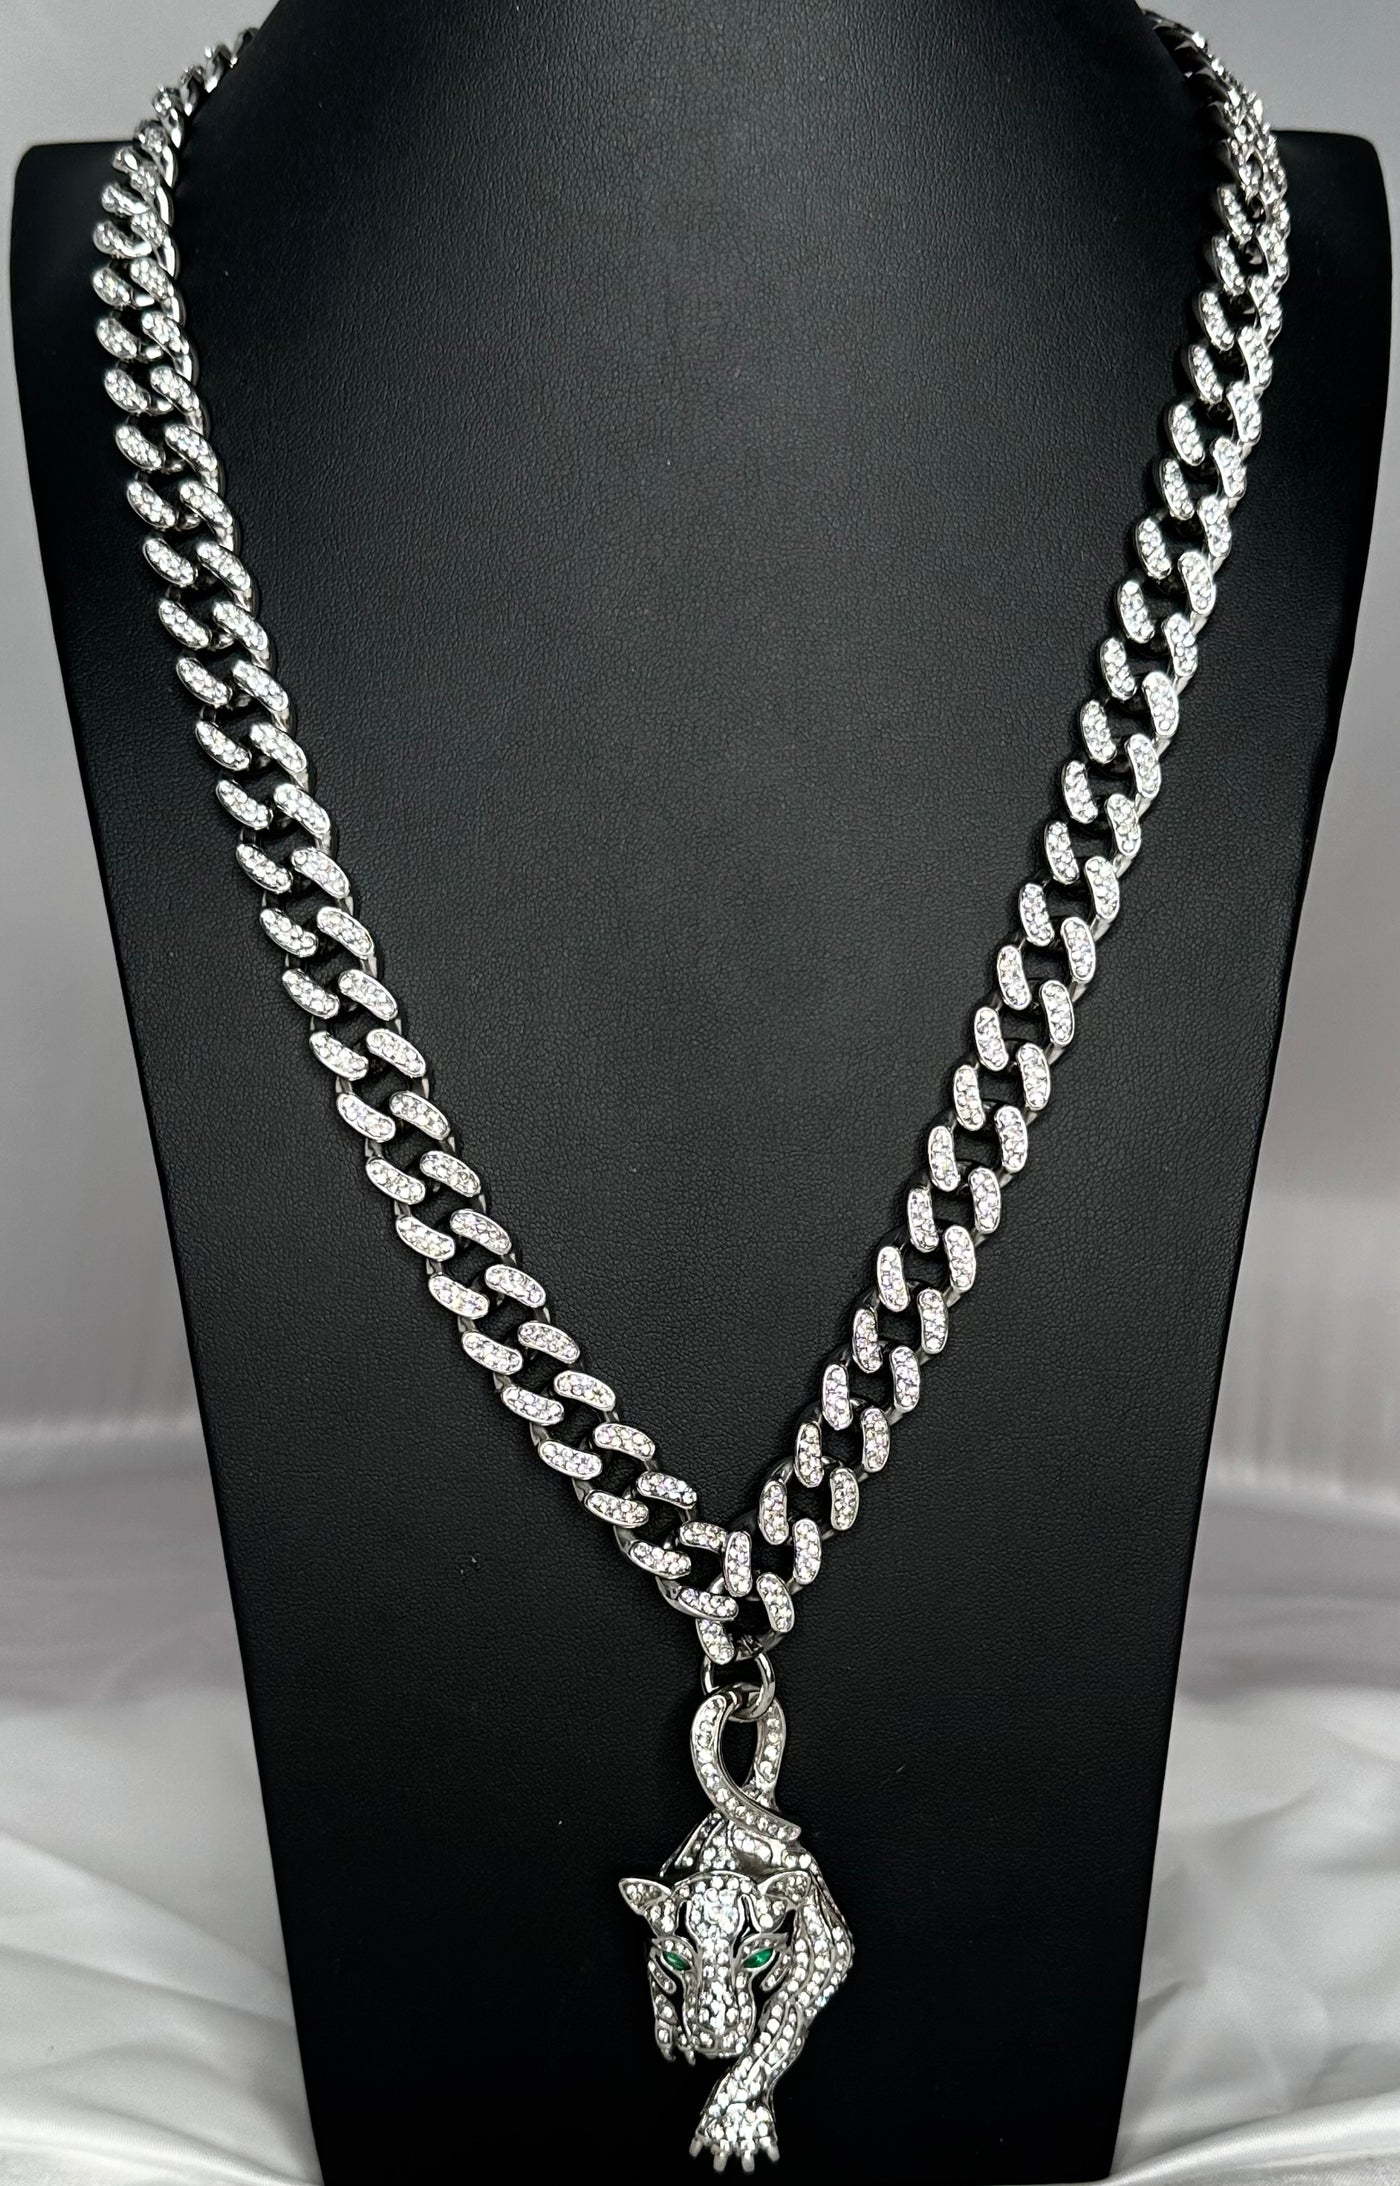 Silver Stainless Steel Iced Necklace with Luxurious Iced Panther Pendant - Exclusive